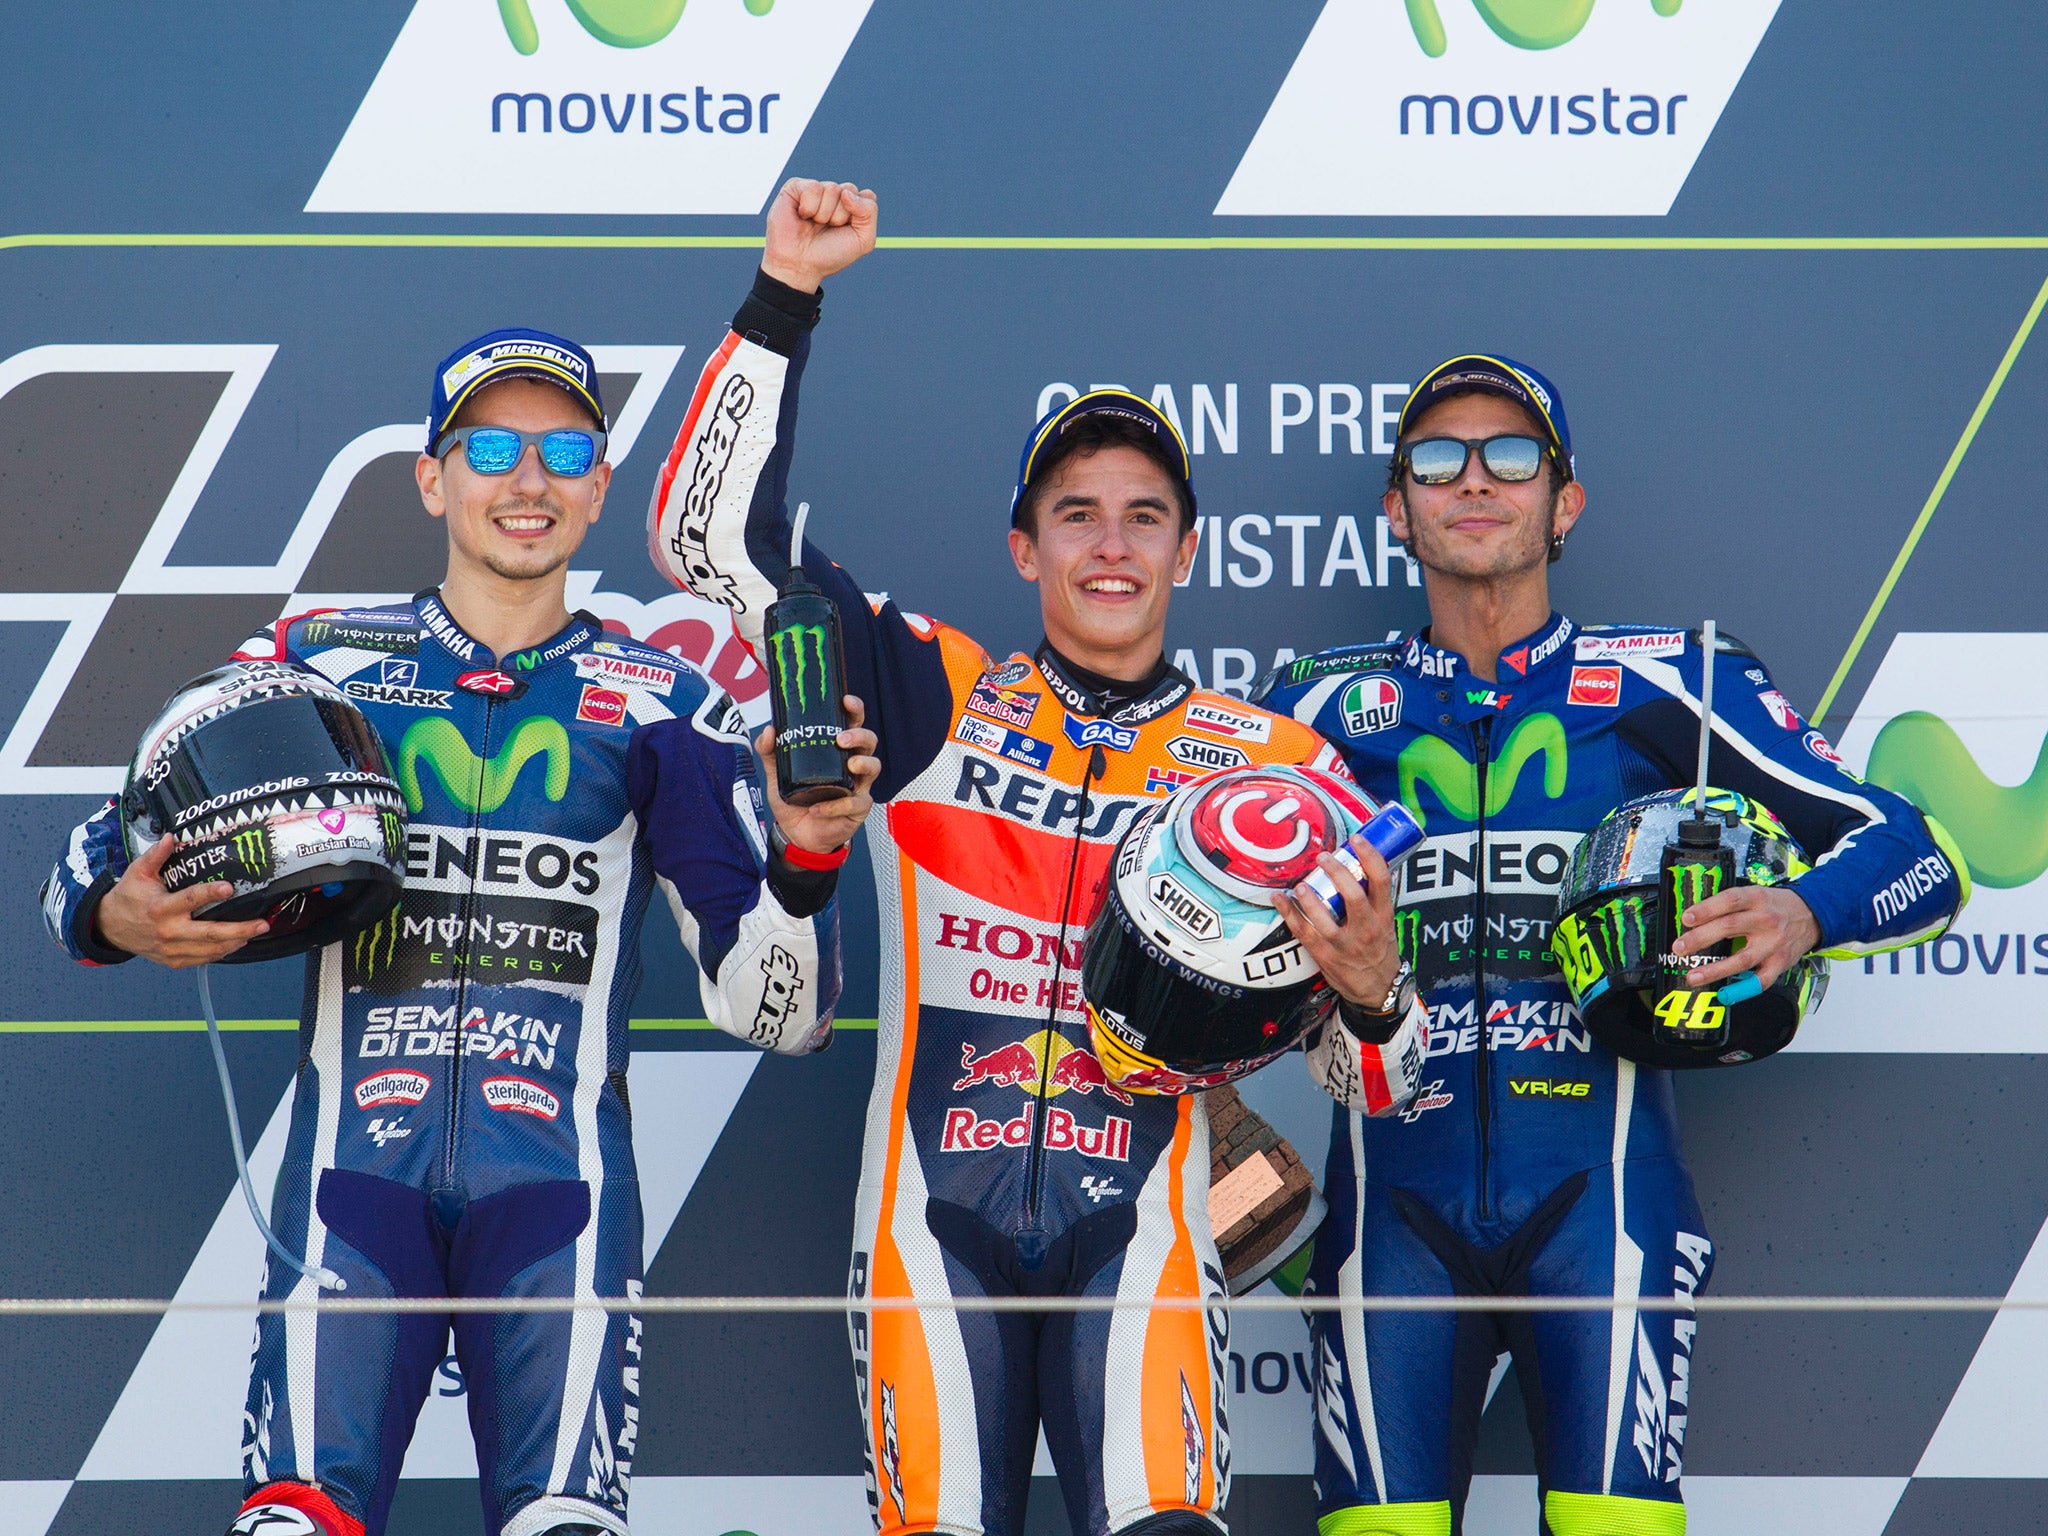 Marquez now leads Rossi (right) by 52 points with Lorenzo (left) a further 14 points behind